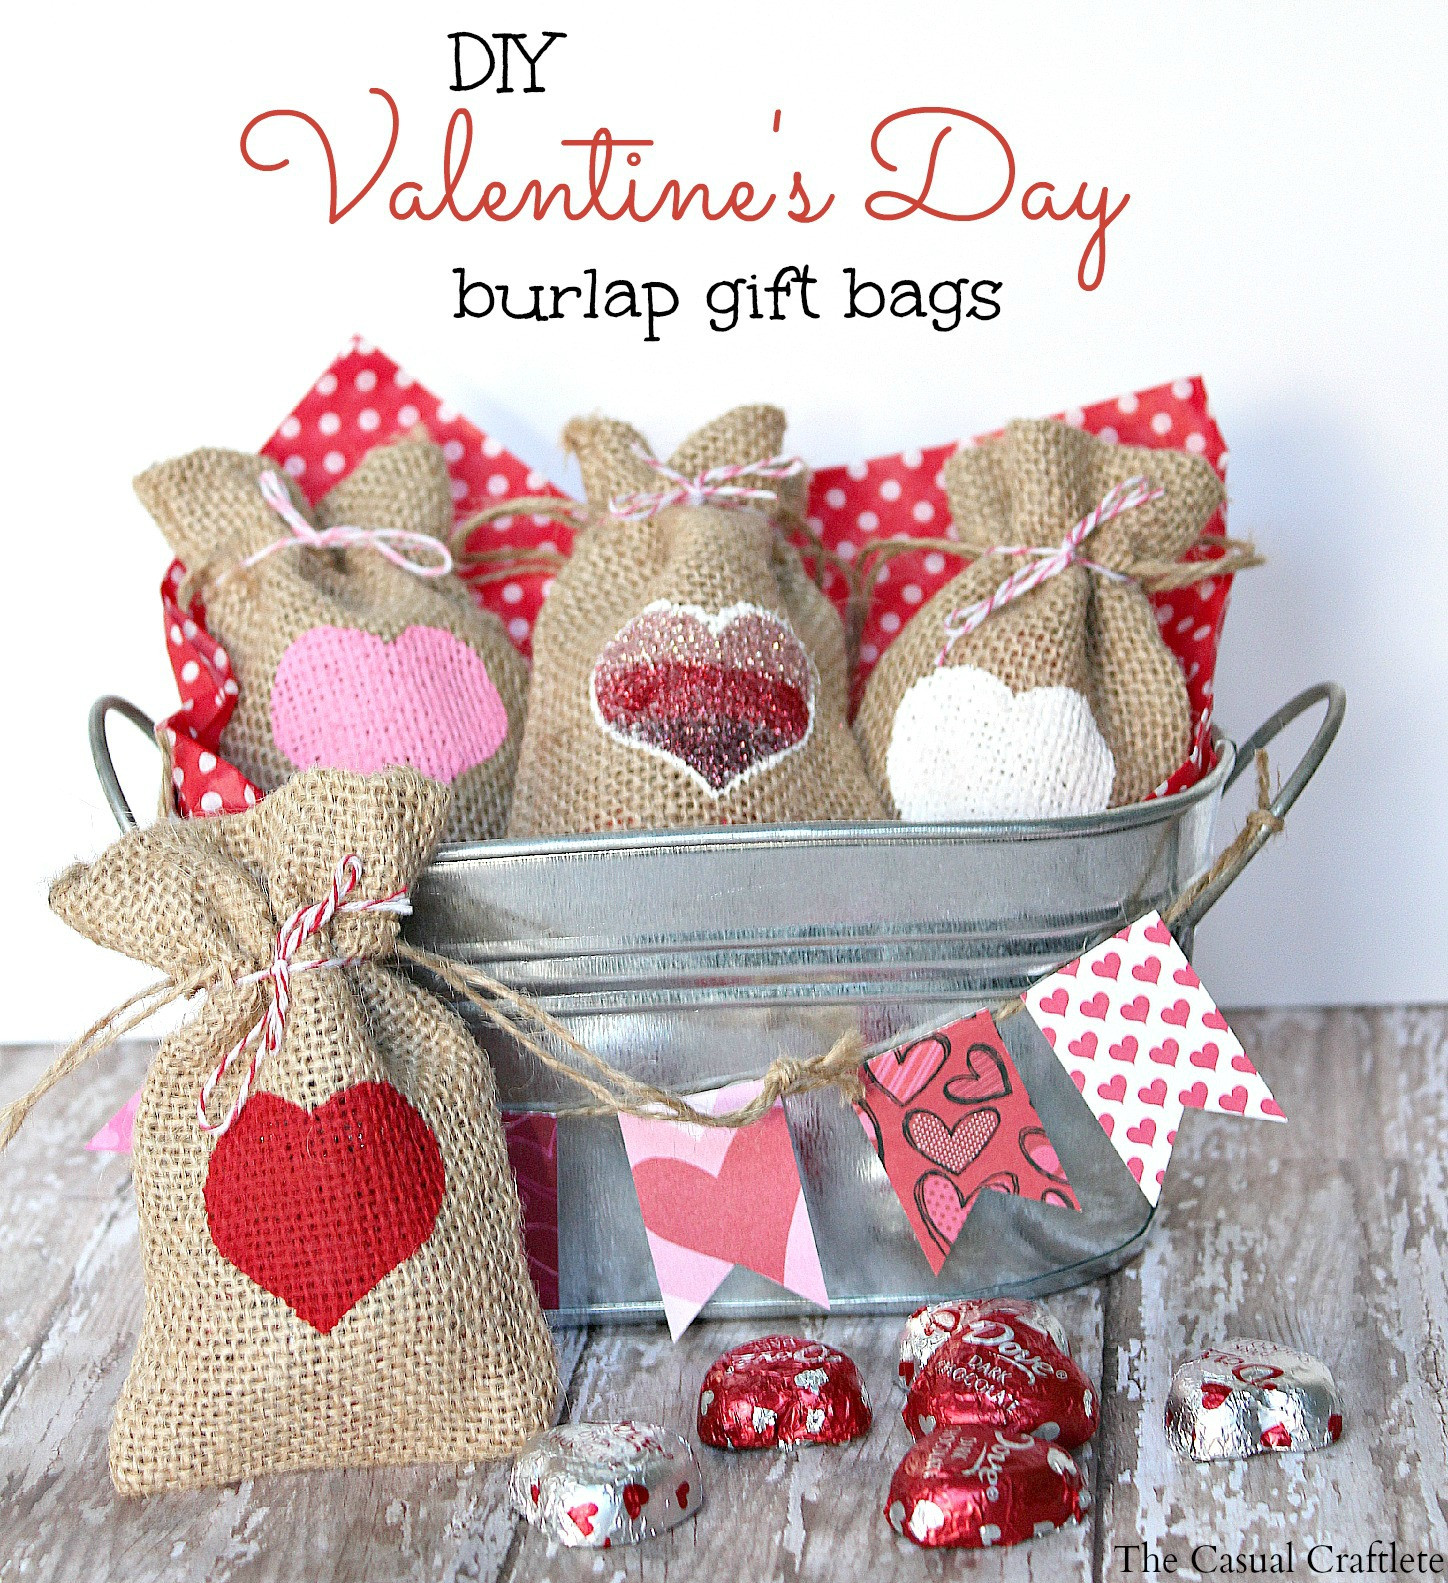 Valentines Day Home Made Gifts Fresh Diy Valentine S Day Burlap Gift Bags